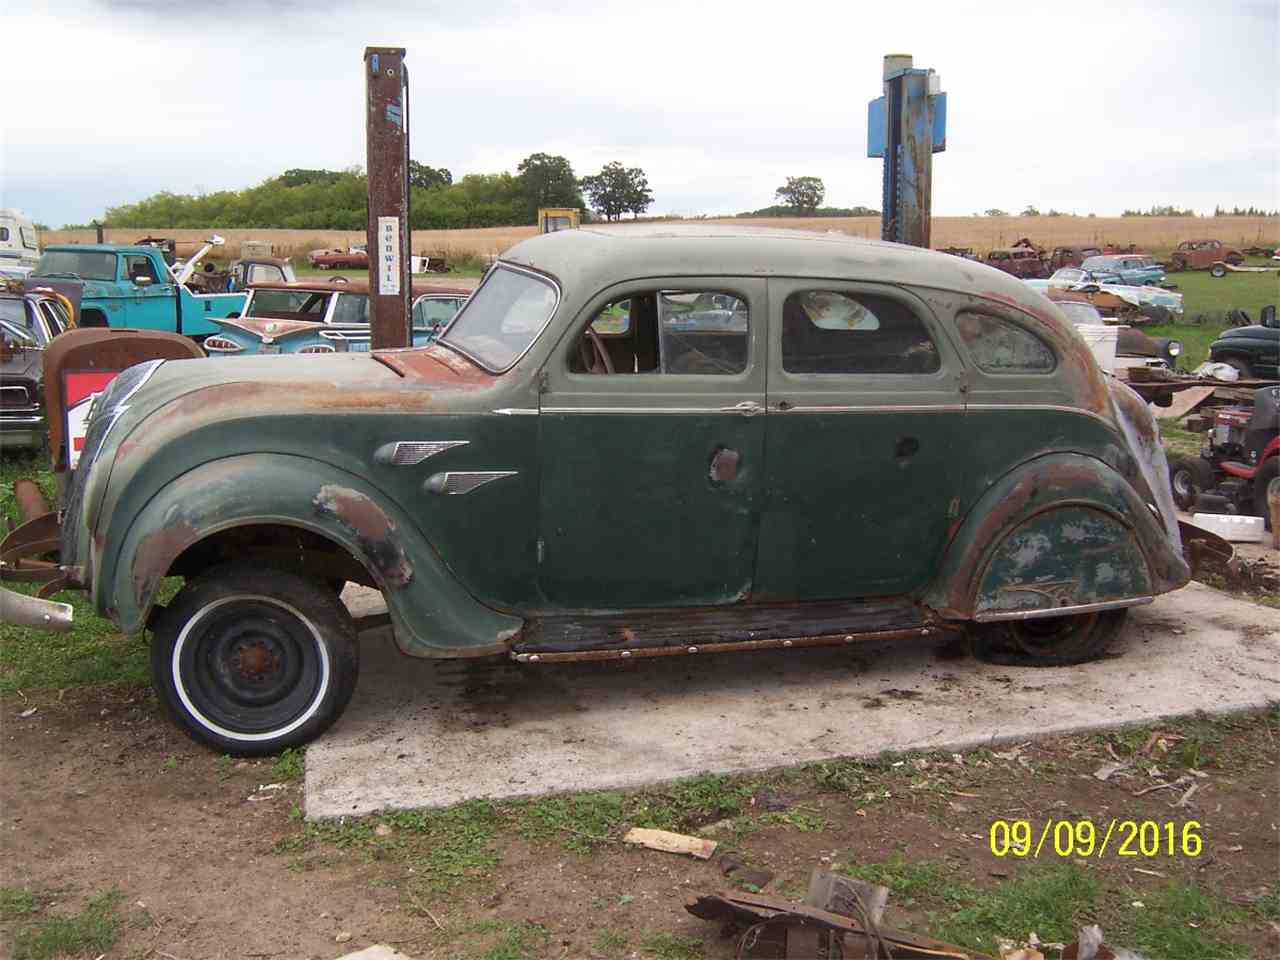 1936 Desoto 4 Dr Sedan For Sale Classiccars Cc 905562 and Classic Cars For Sale Mn